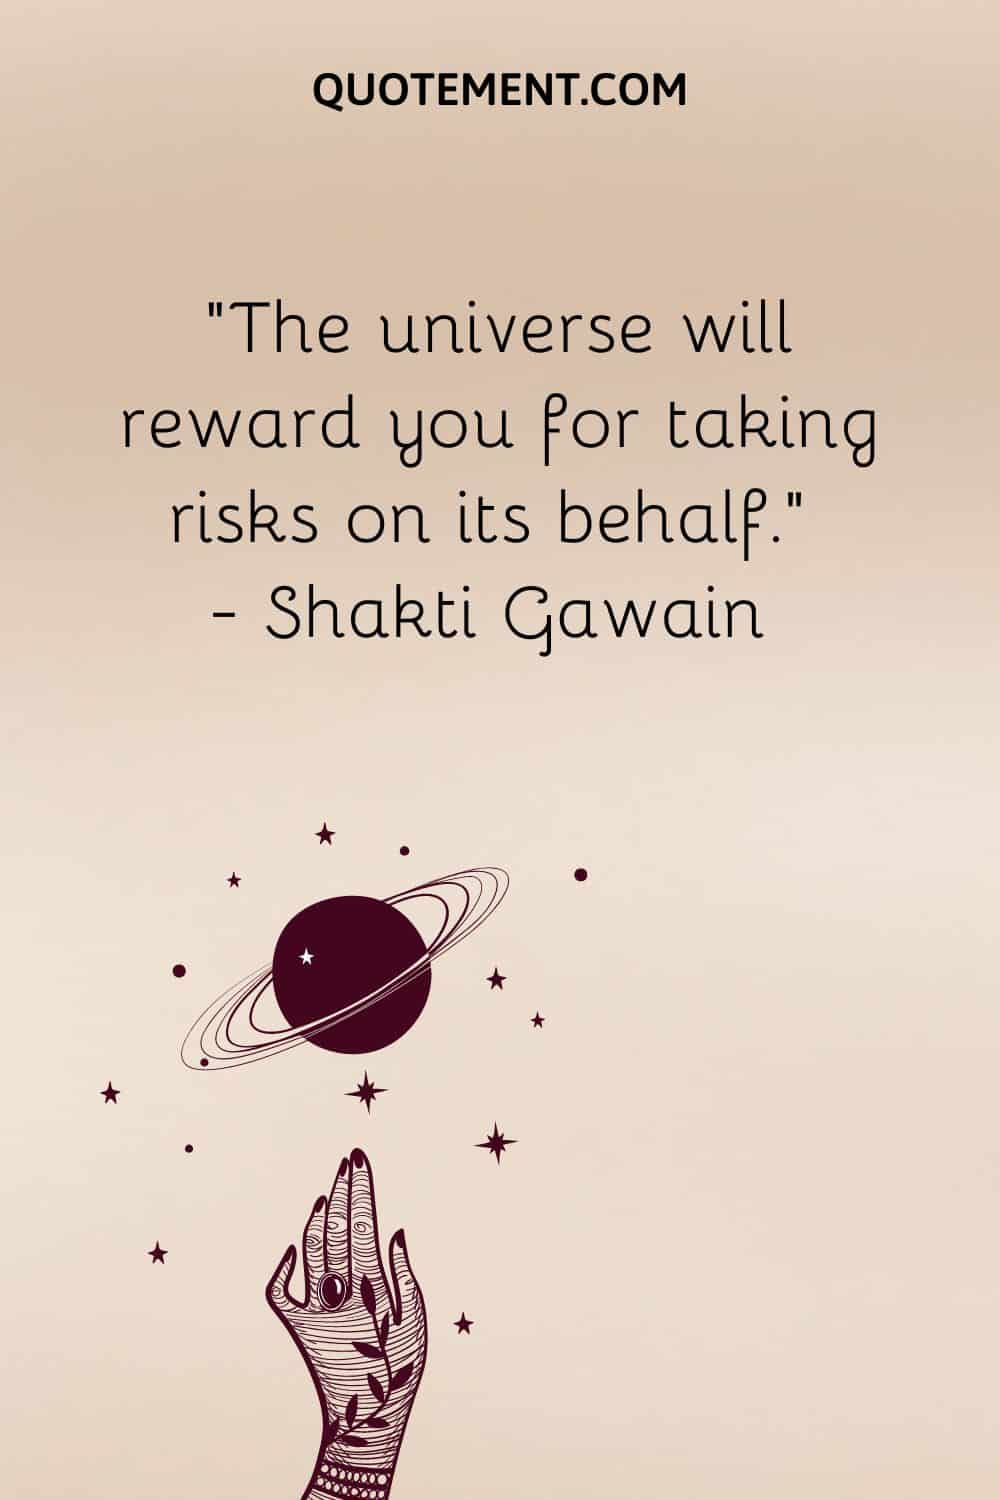 The universe will reward you for taking risks on its behalf